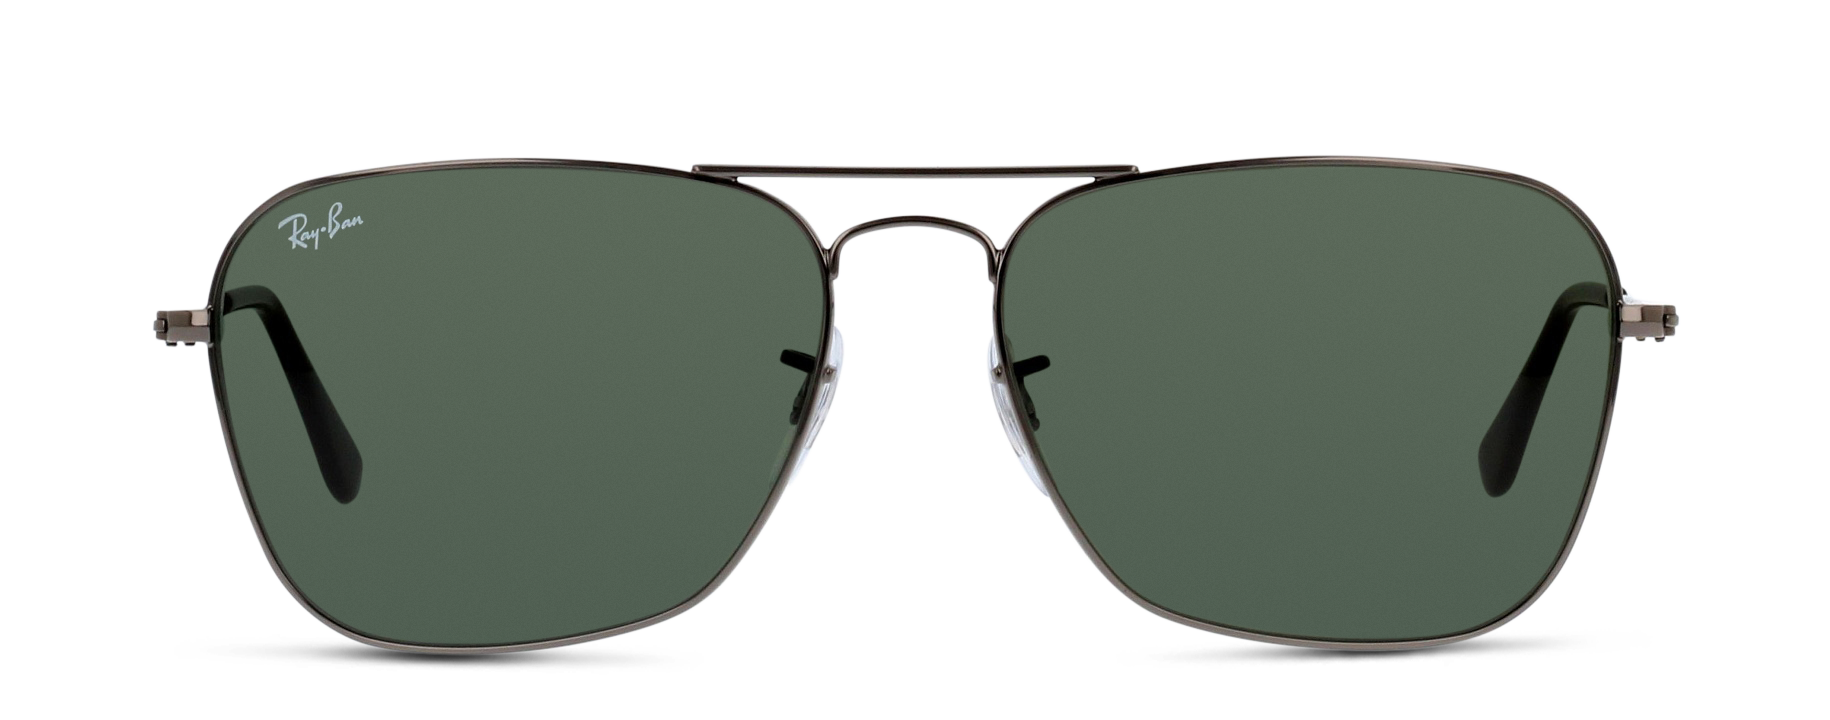 [products.image.front] Ray-Ban Caravan RB3136 004